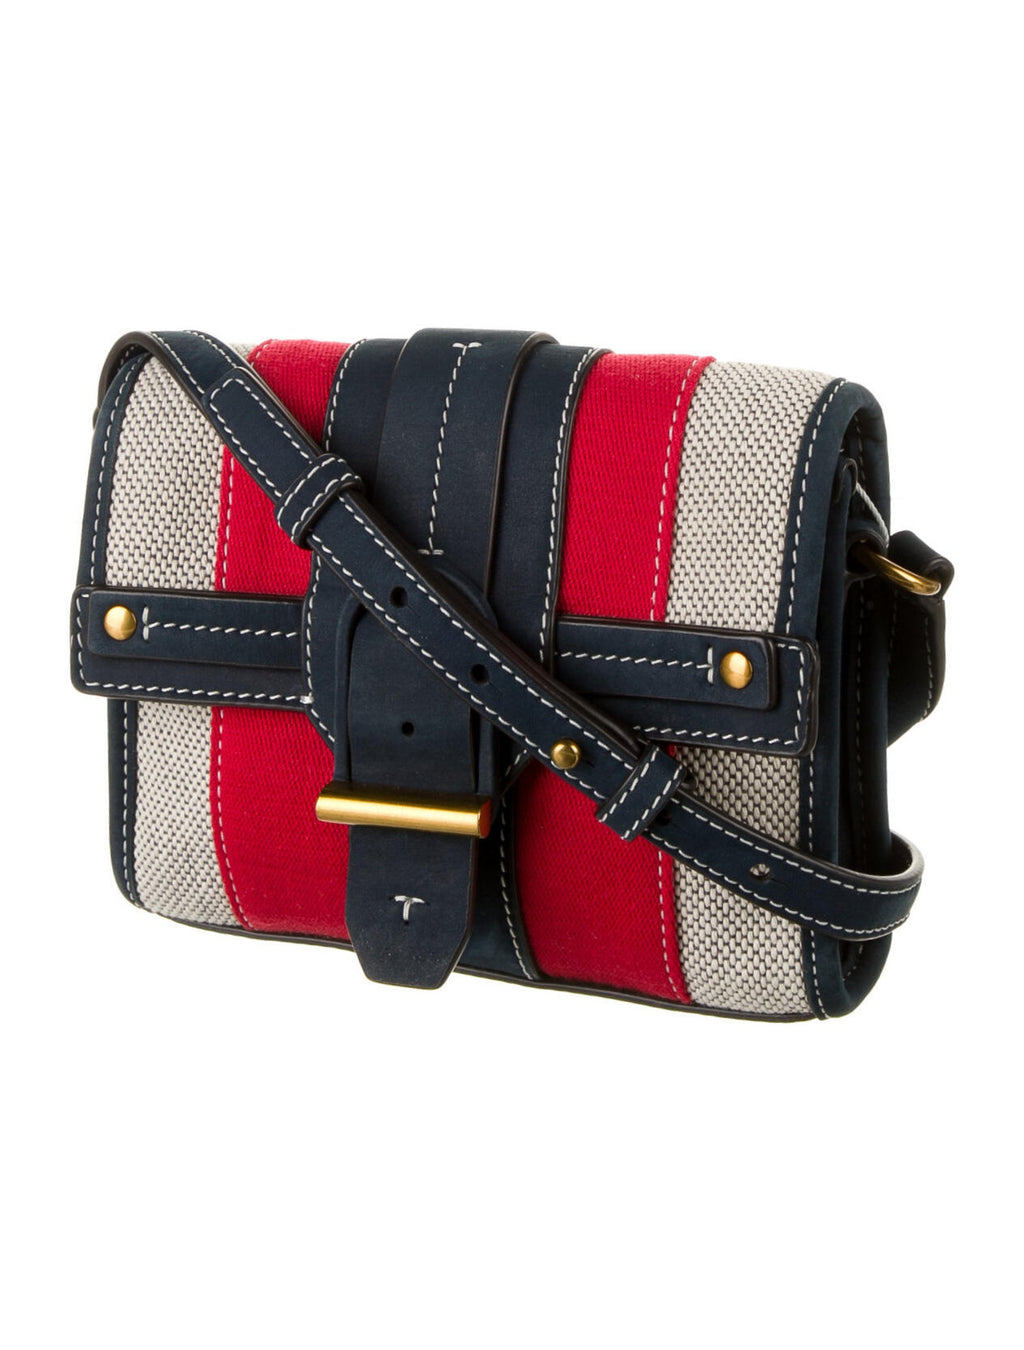 Tory Burch Canvas and Suede Crossbody Bag